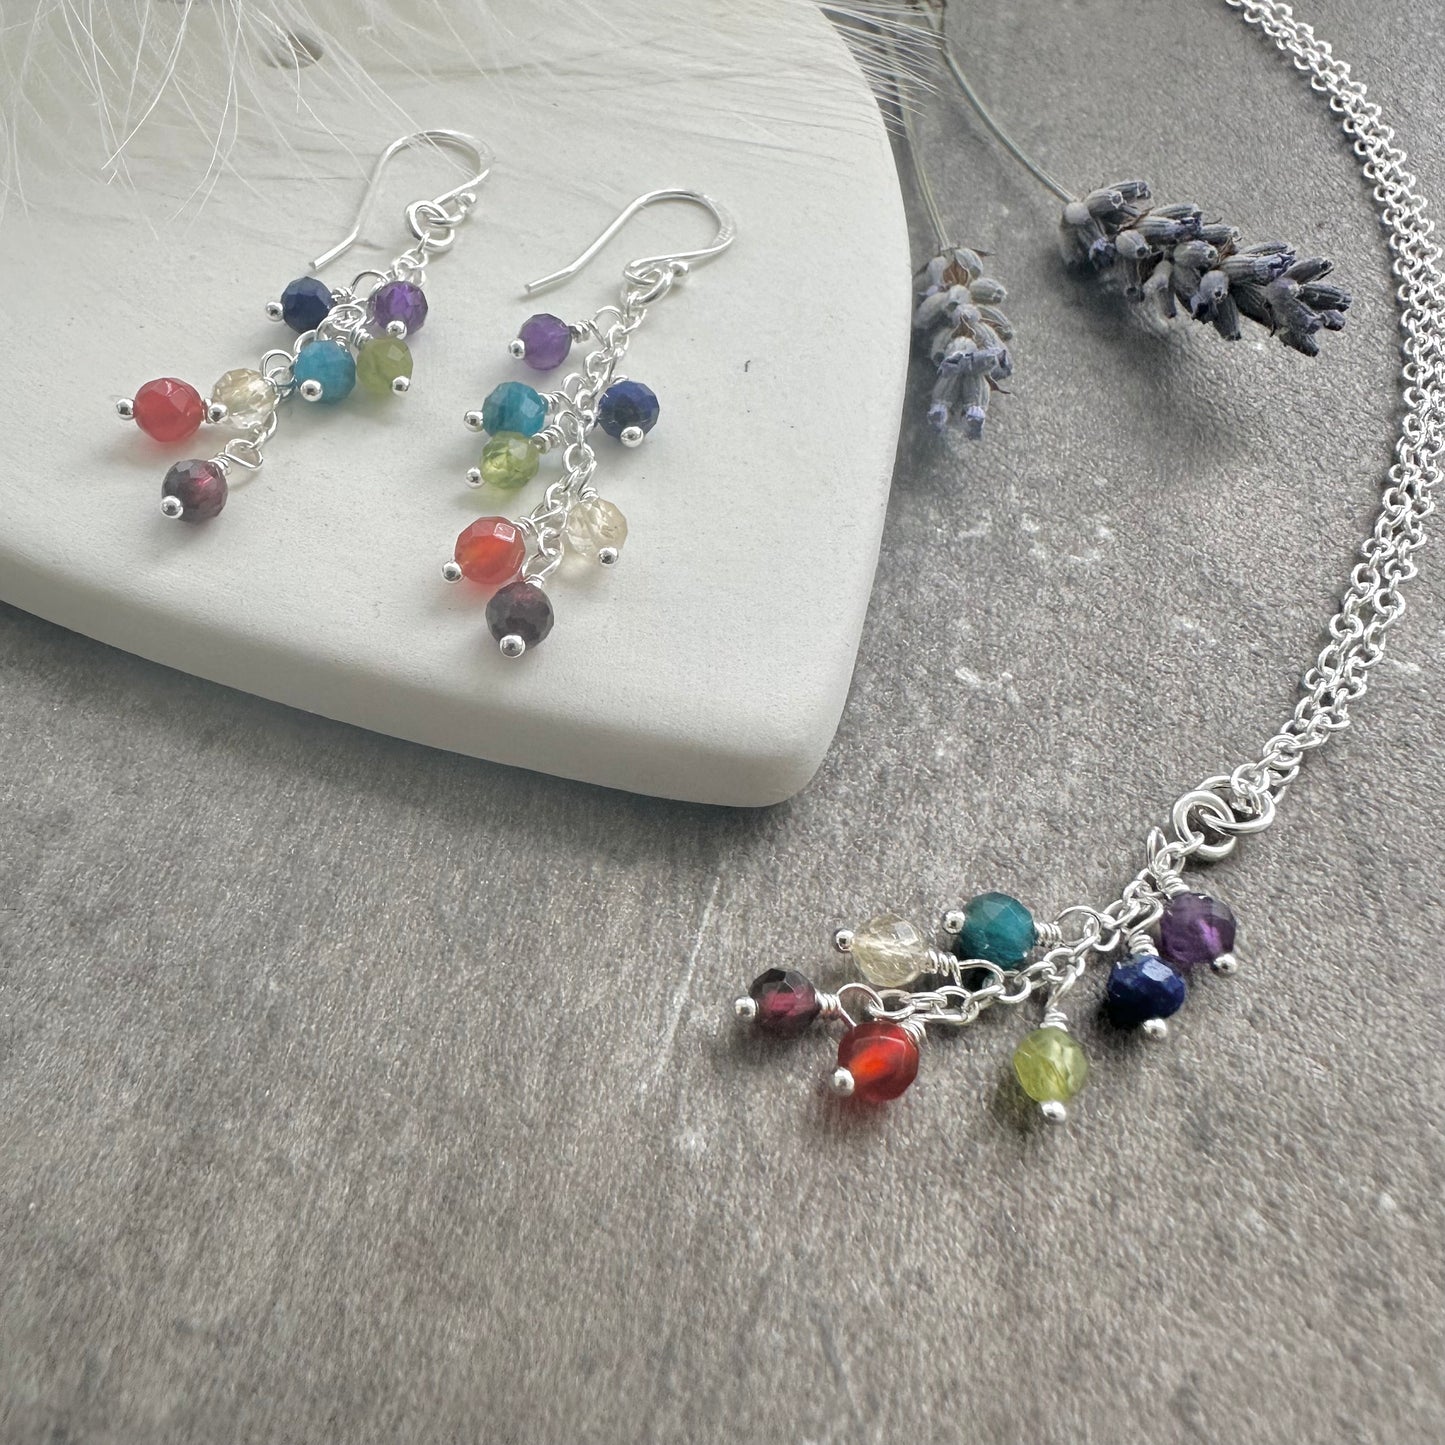 Rainbow Pendant Necklace Earrings Set, Gemstone Chakra Jewellery, Mindfulness Gift, Dainty Necklace, sterling silver necklace earrings